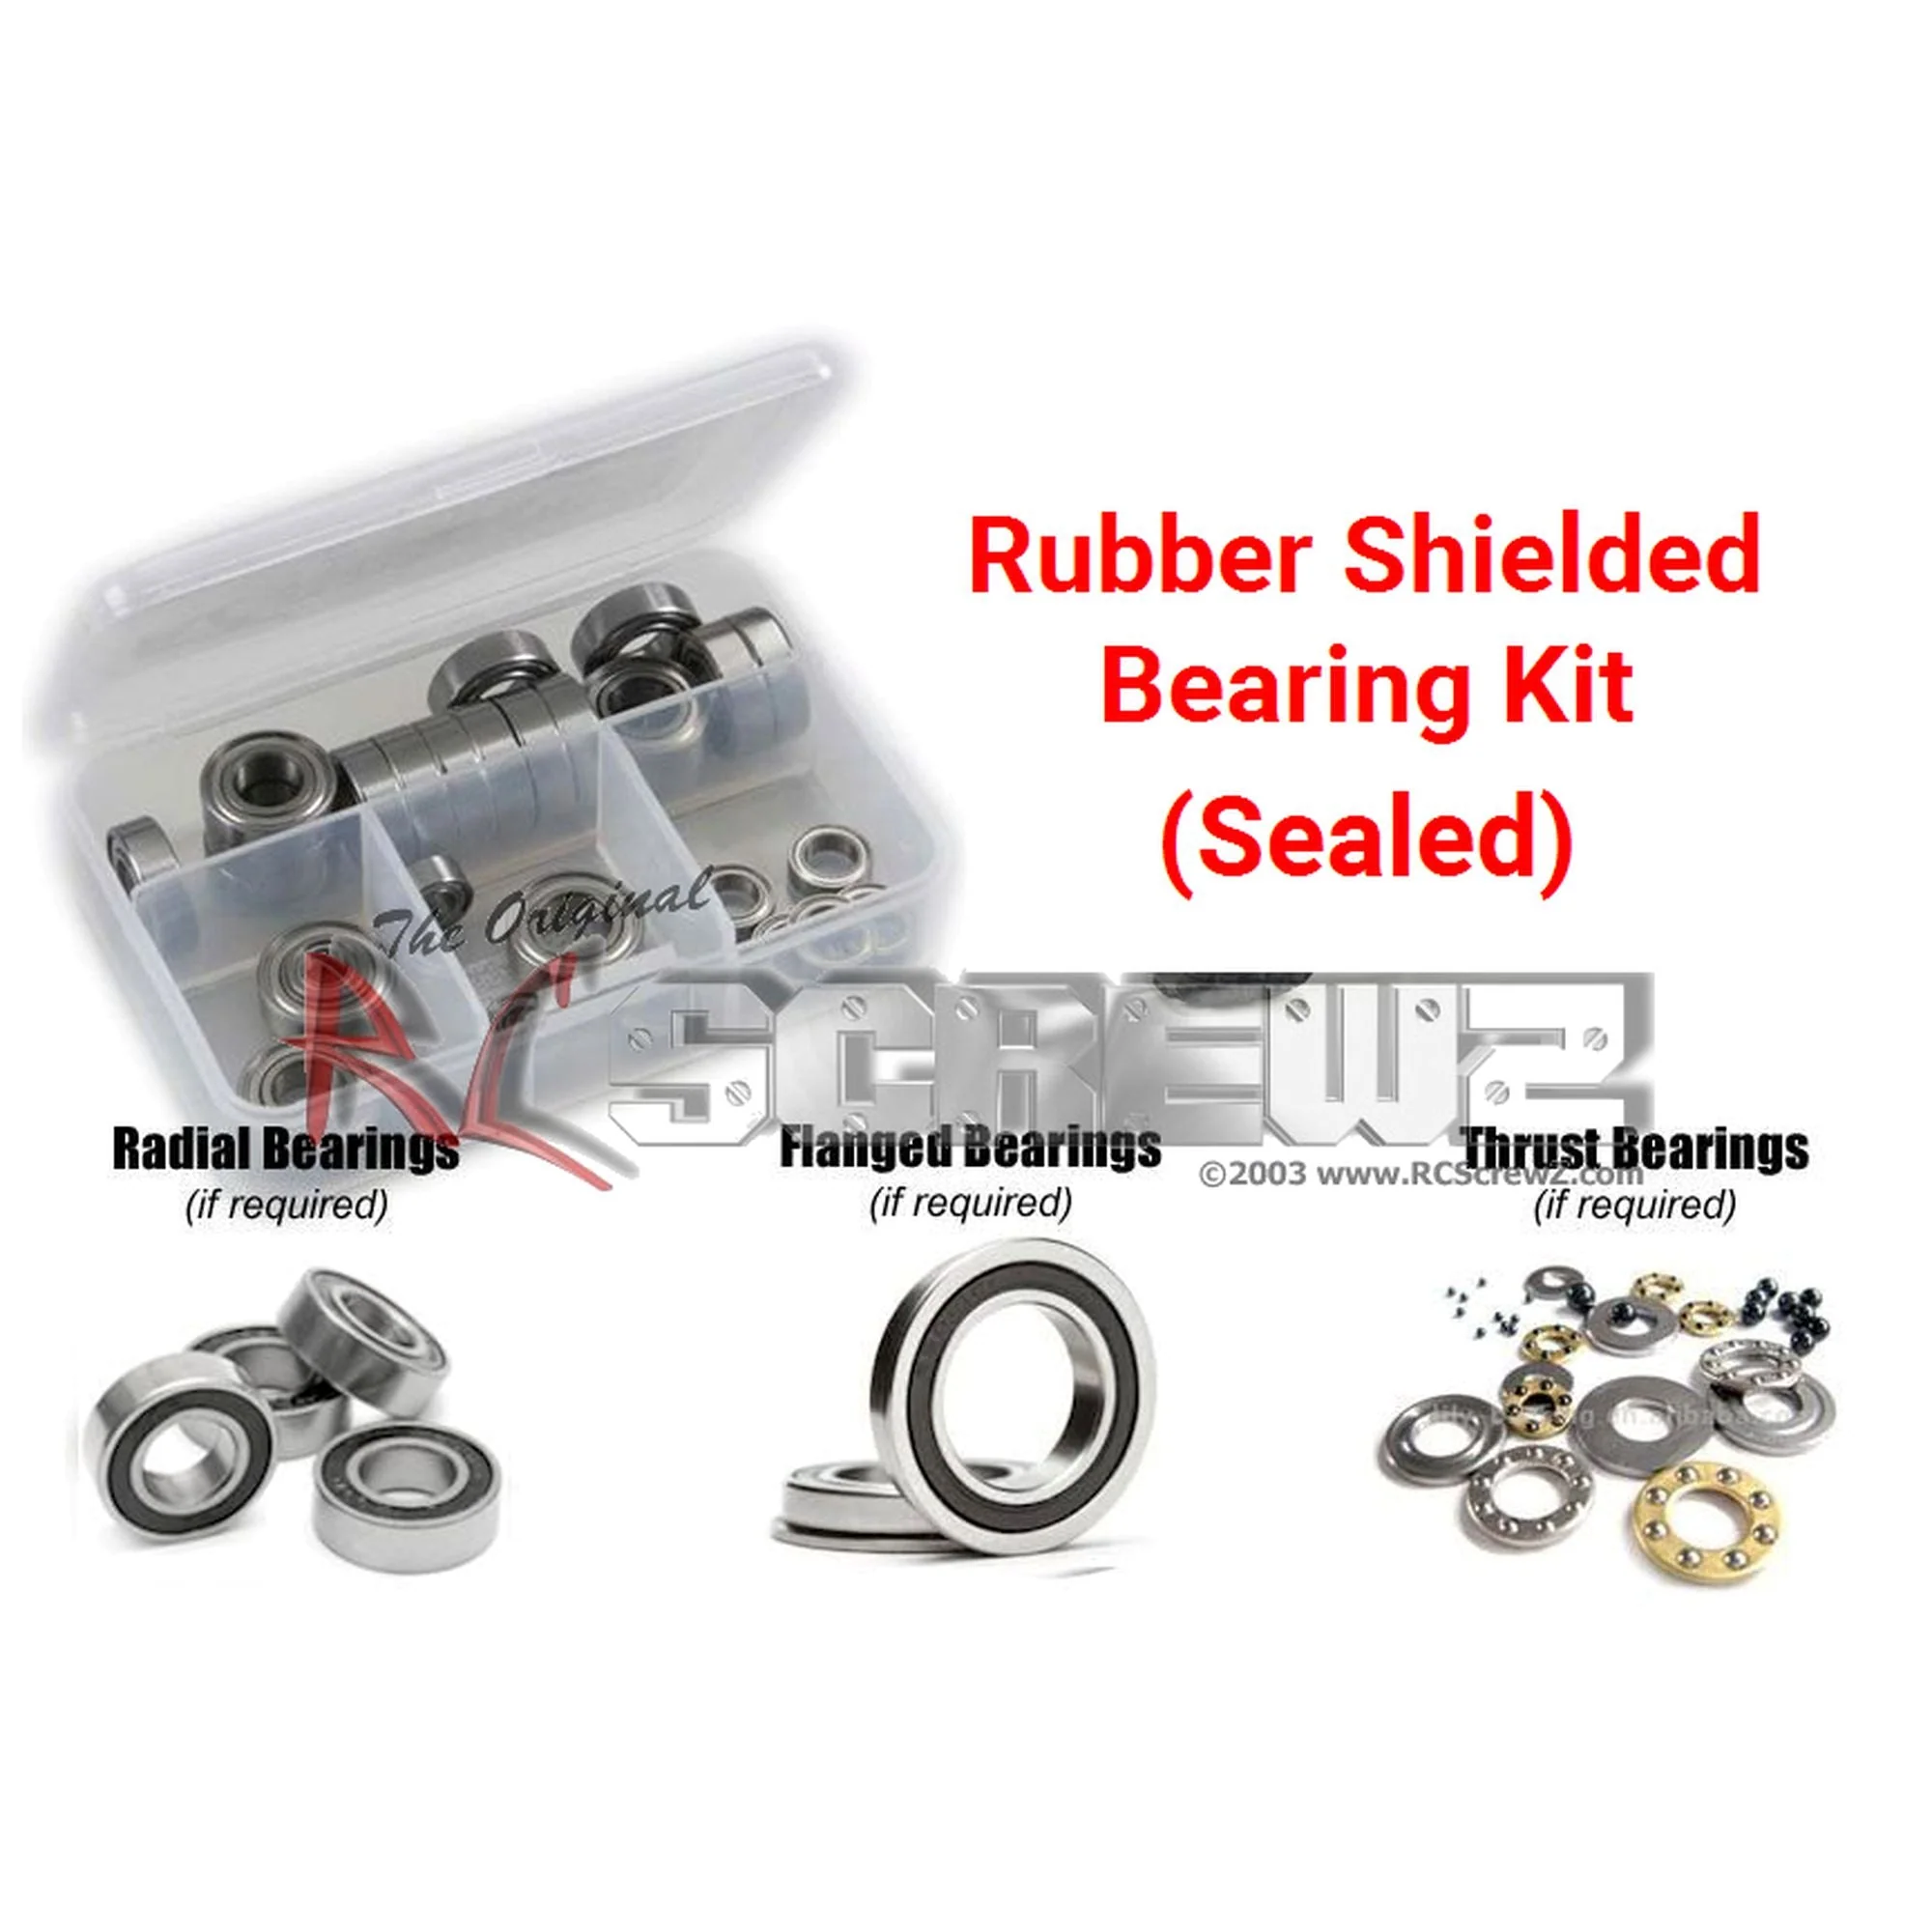 RCScrewZ Rubber Shielded Bearing Kit kyo135r for Kyosho DBX 2.0 Readyset #31098 - Picture 1 of 12